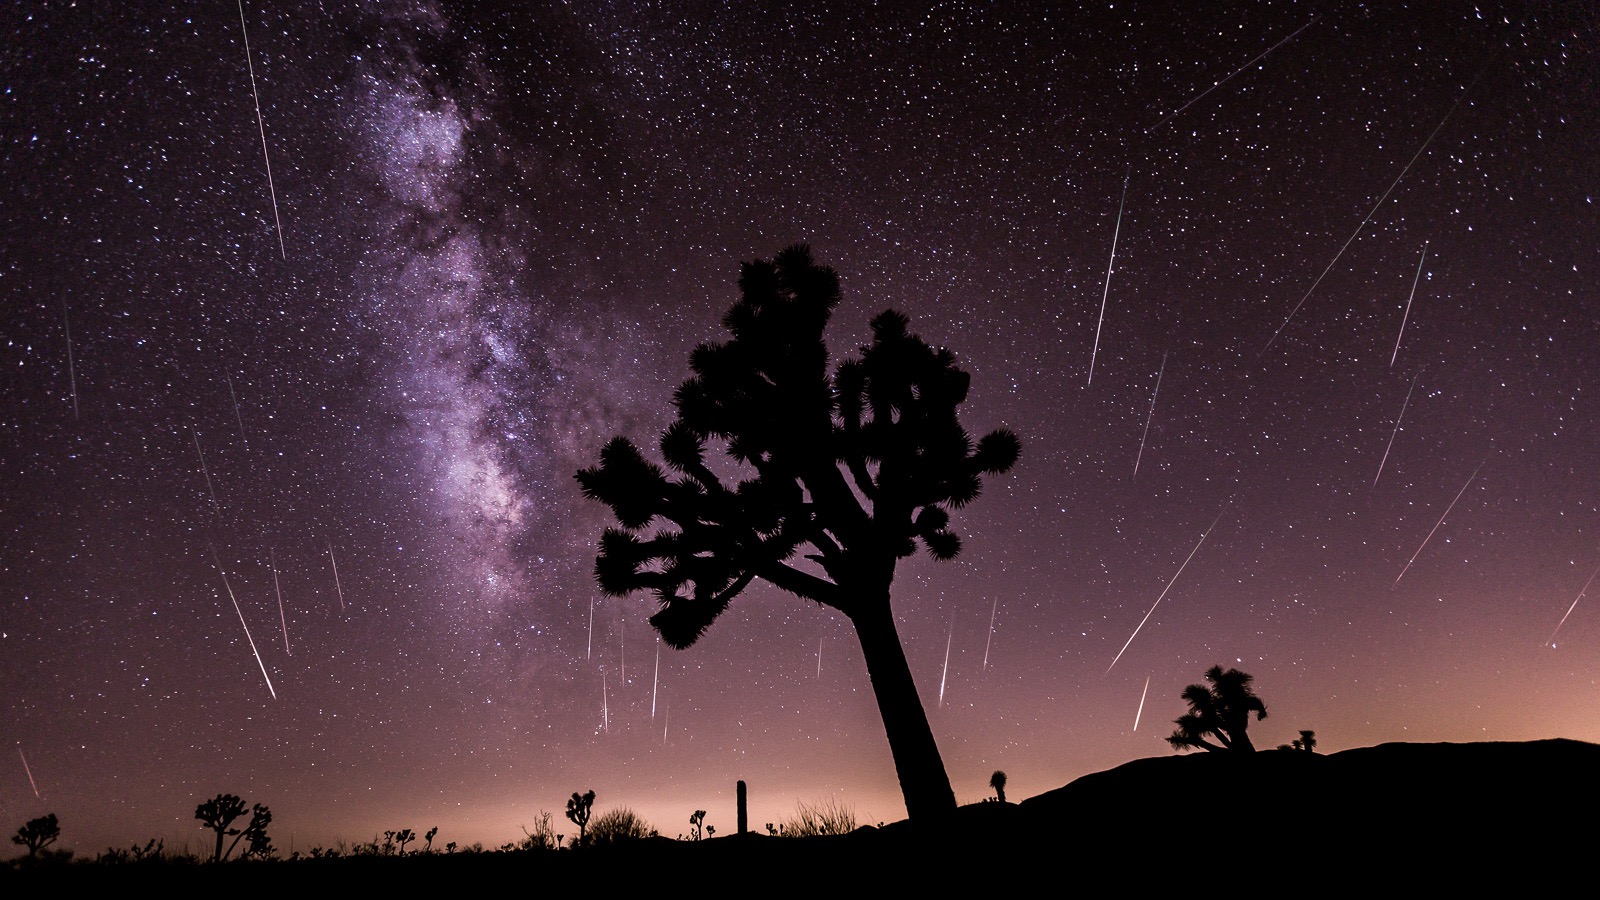 Three Days of Perseid Meteor Shower in 60 Seconds